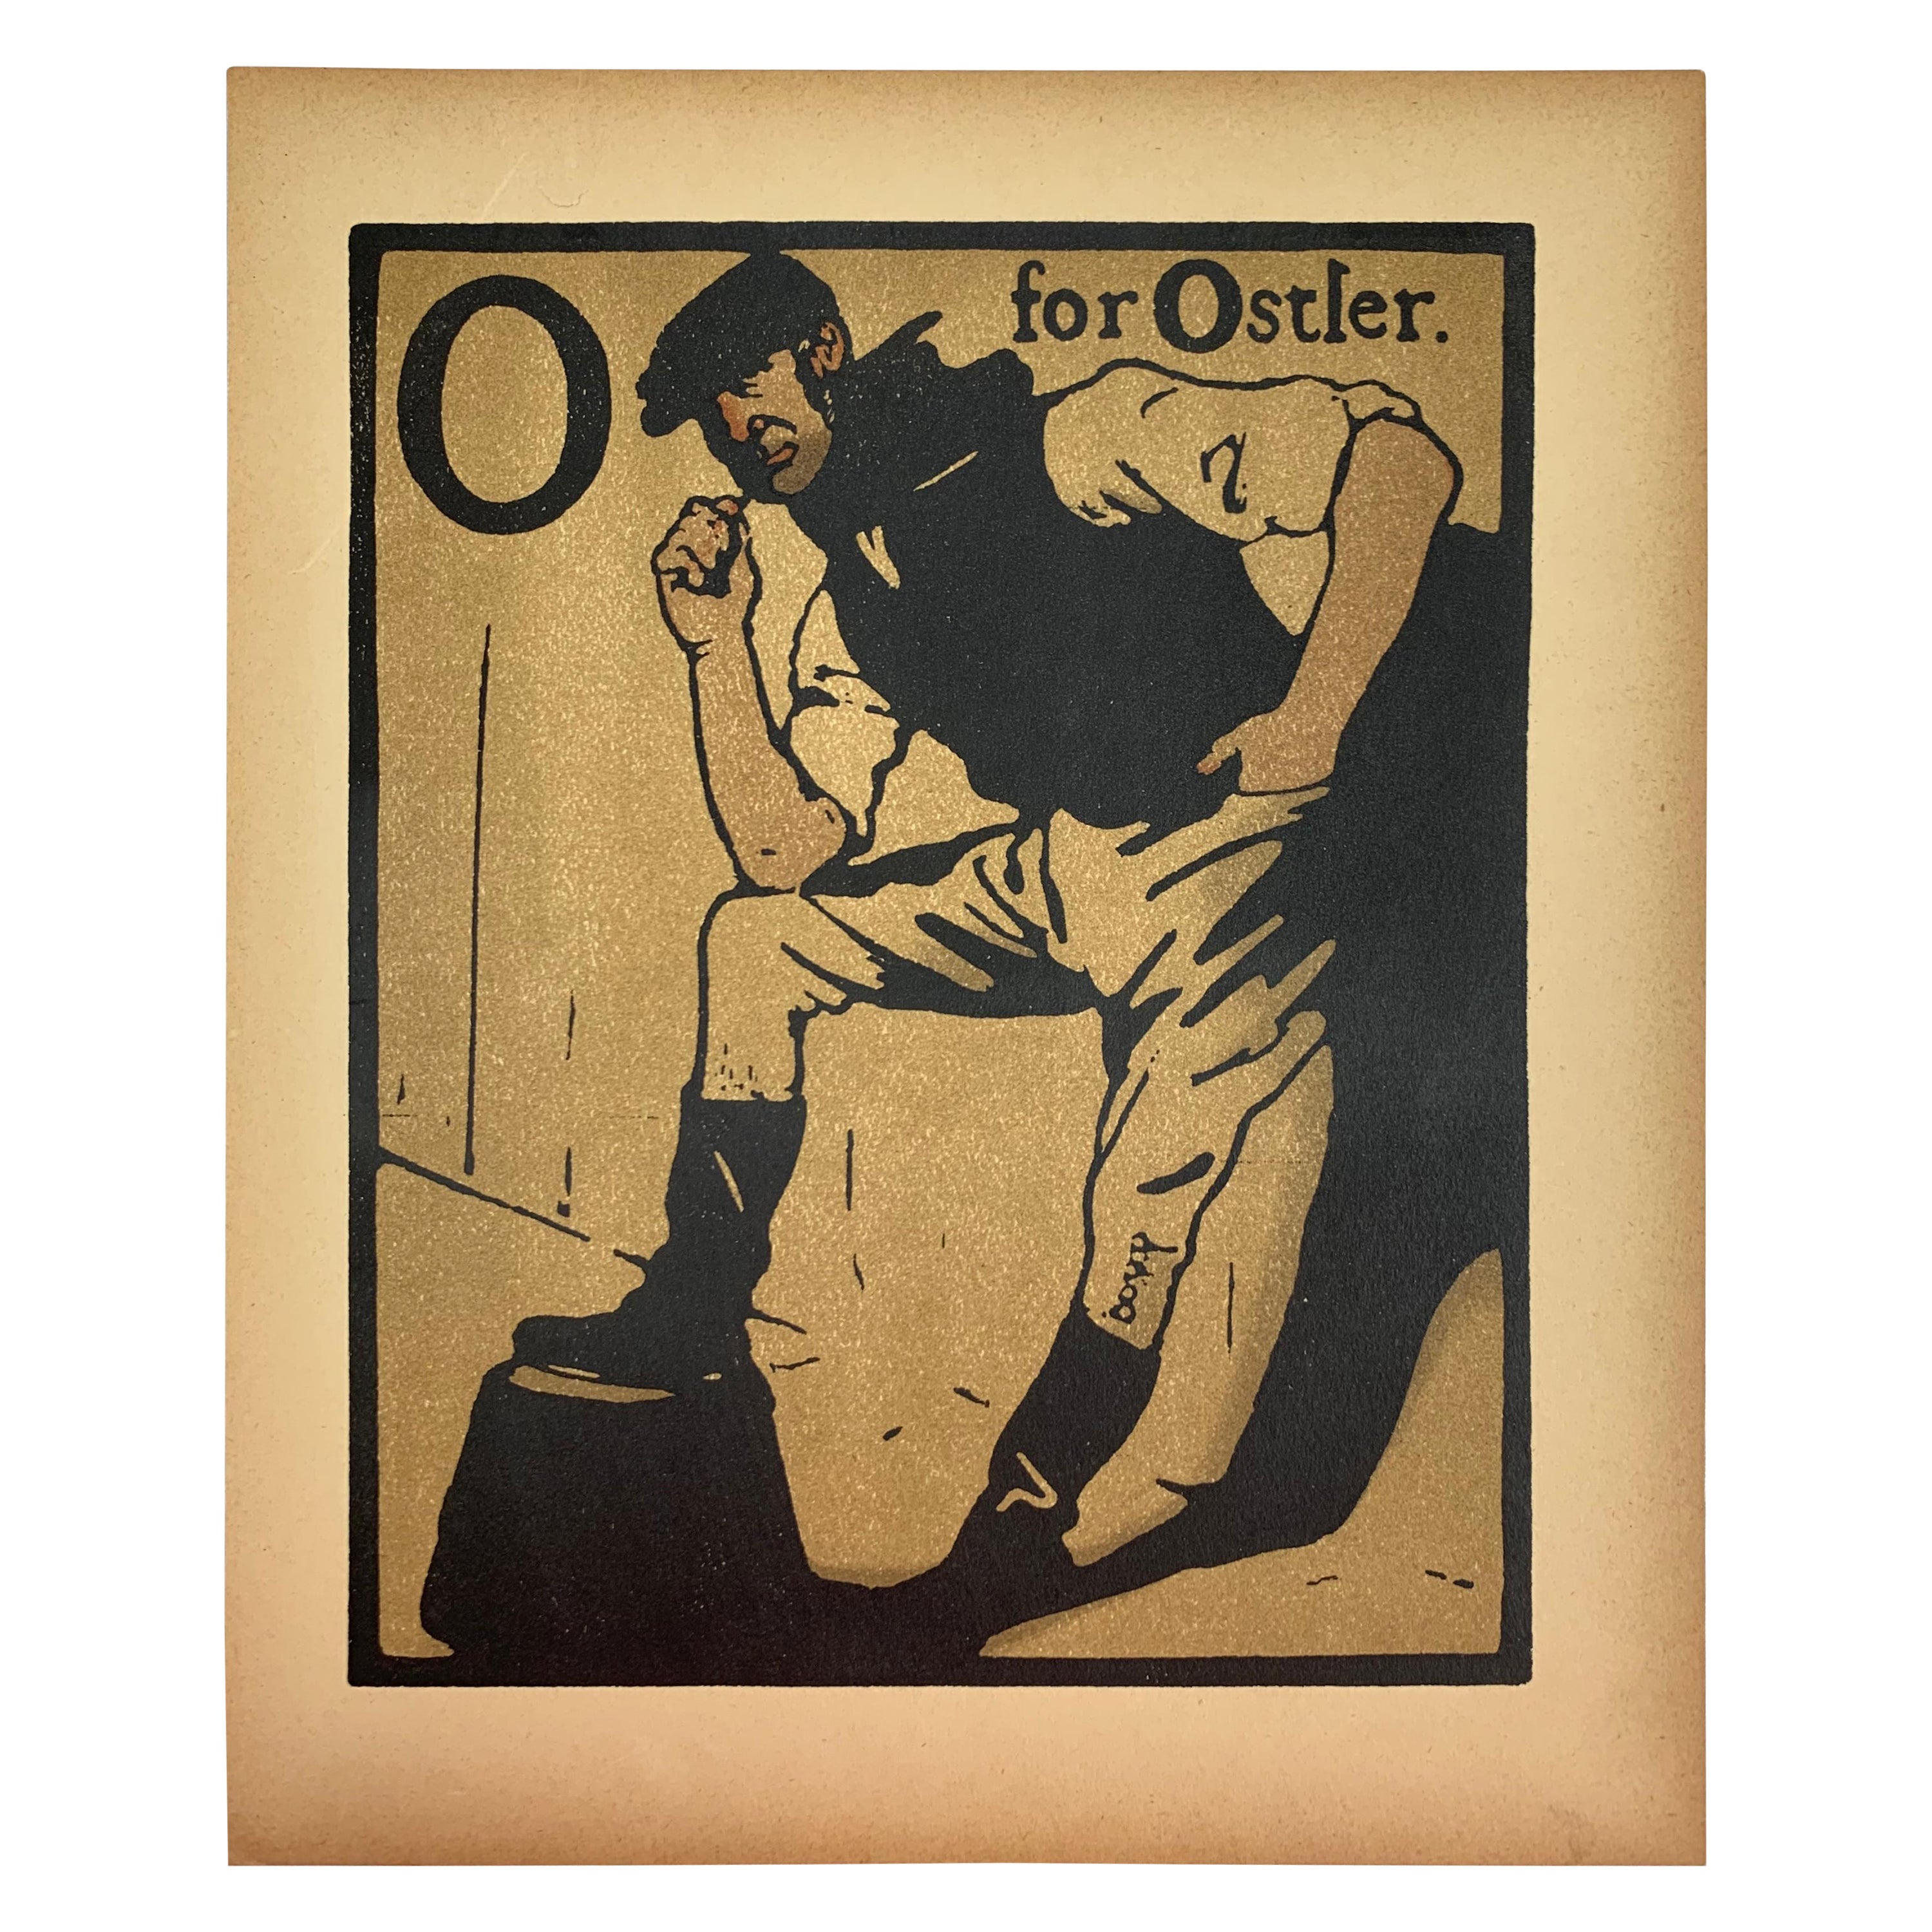 "An Alphabet", O for Ostler by William Nicholson, First Edition, London, 1898 For Sale